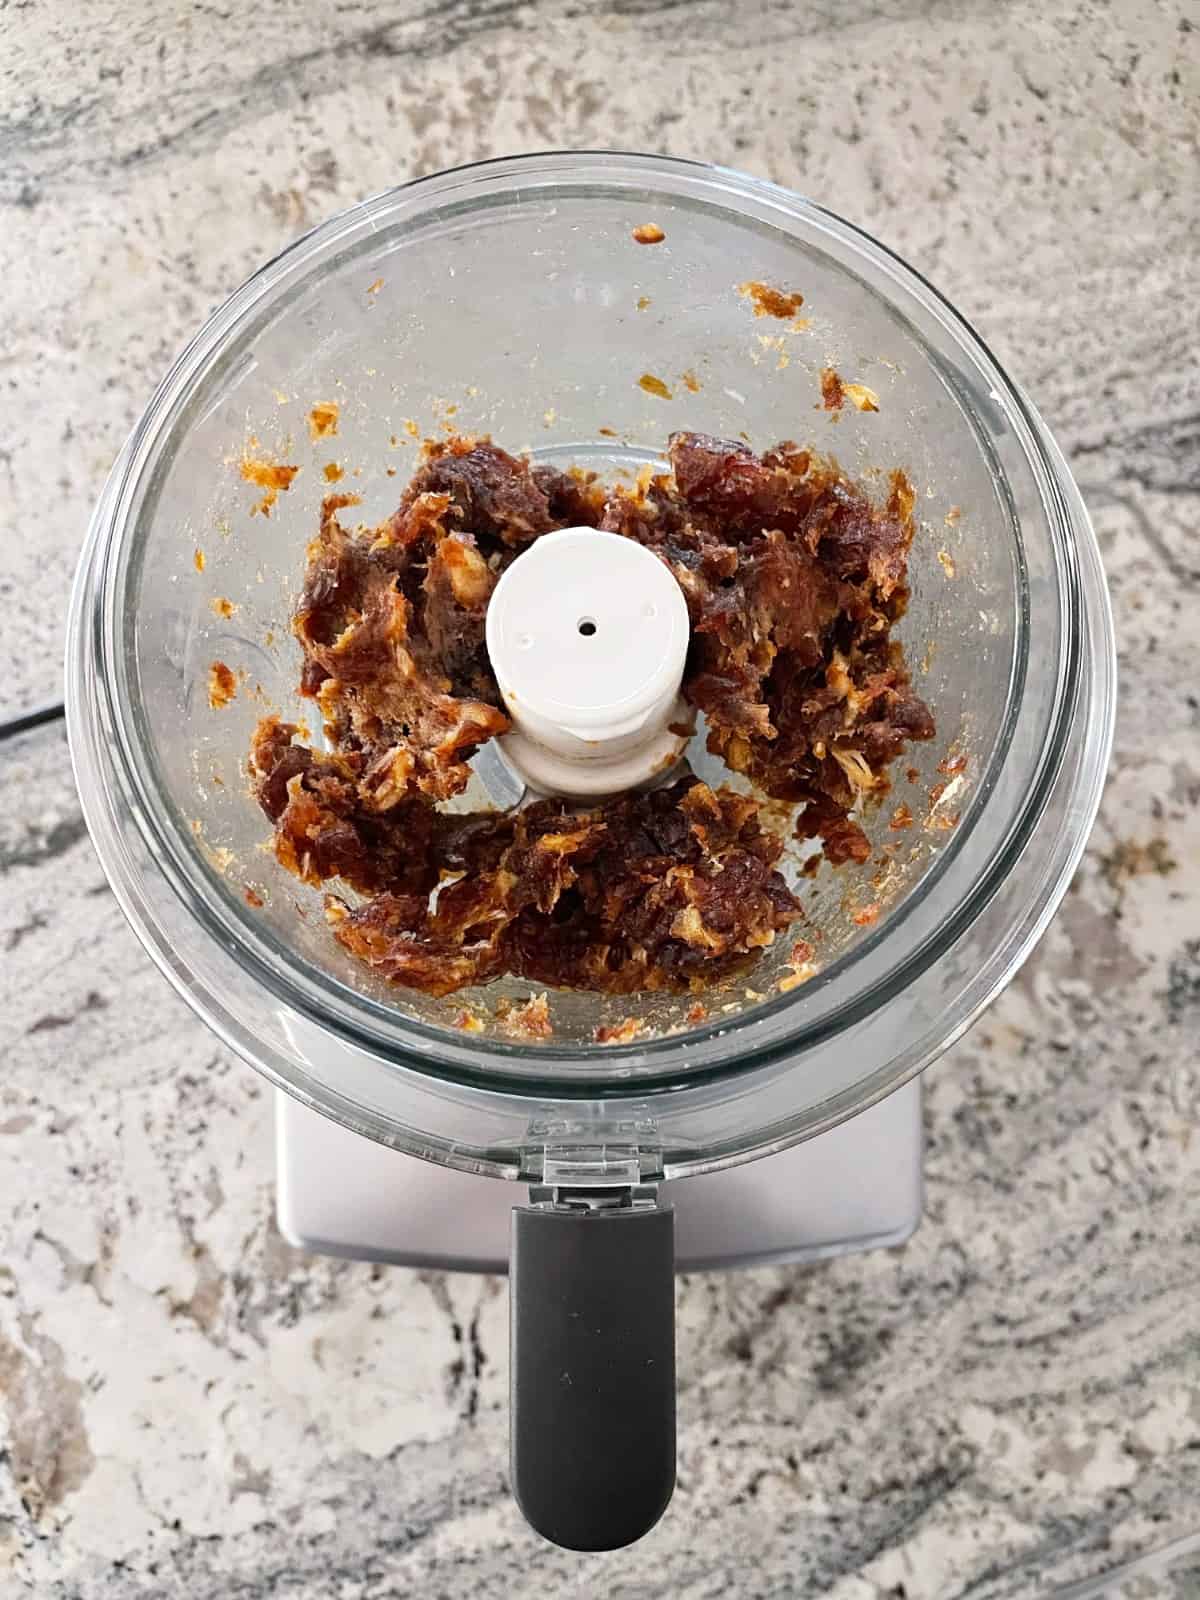 Finely chopped dates in food processor on granite counter.